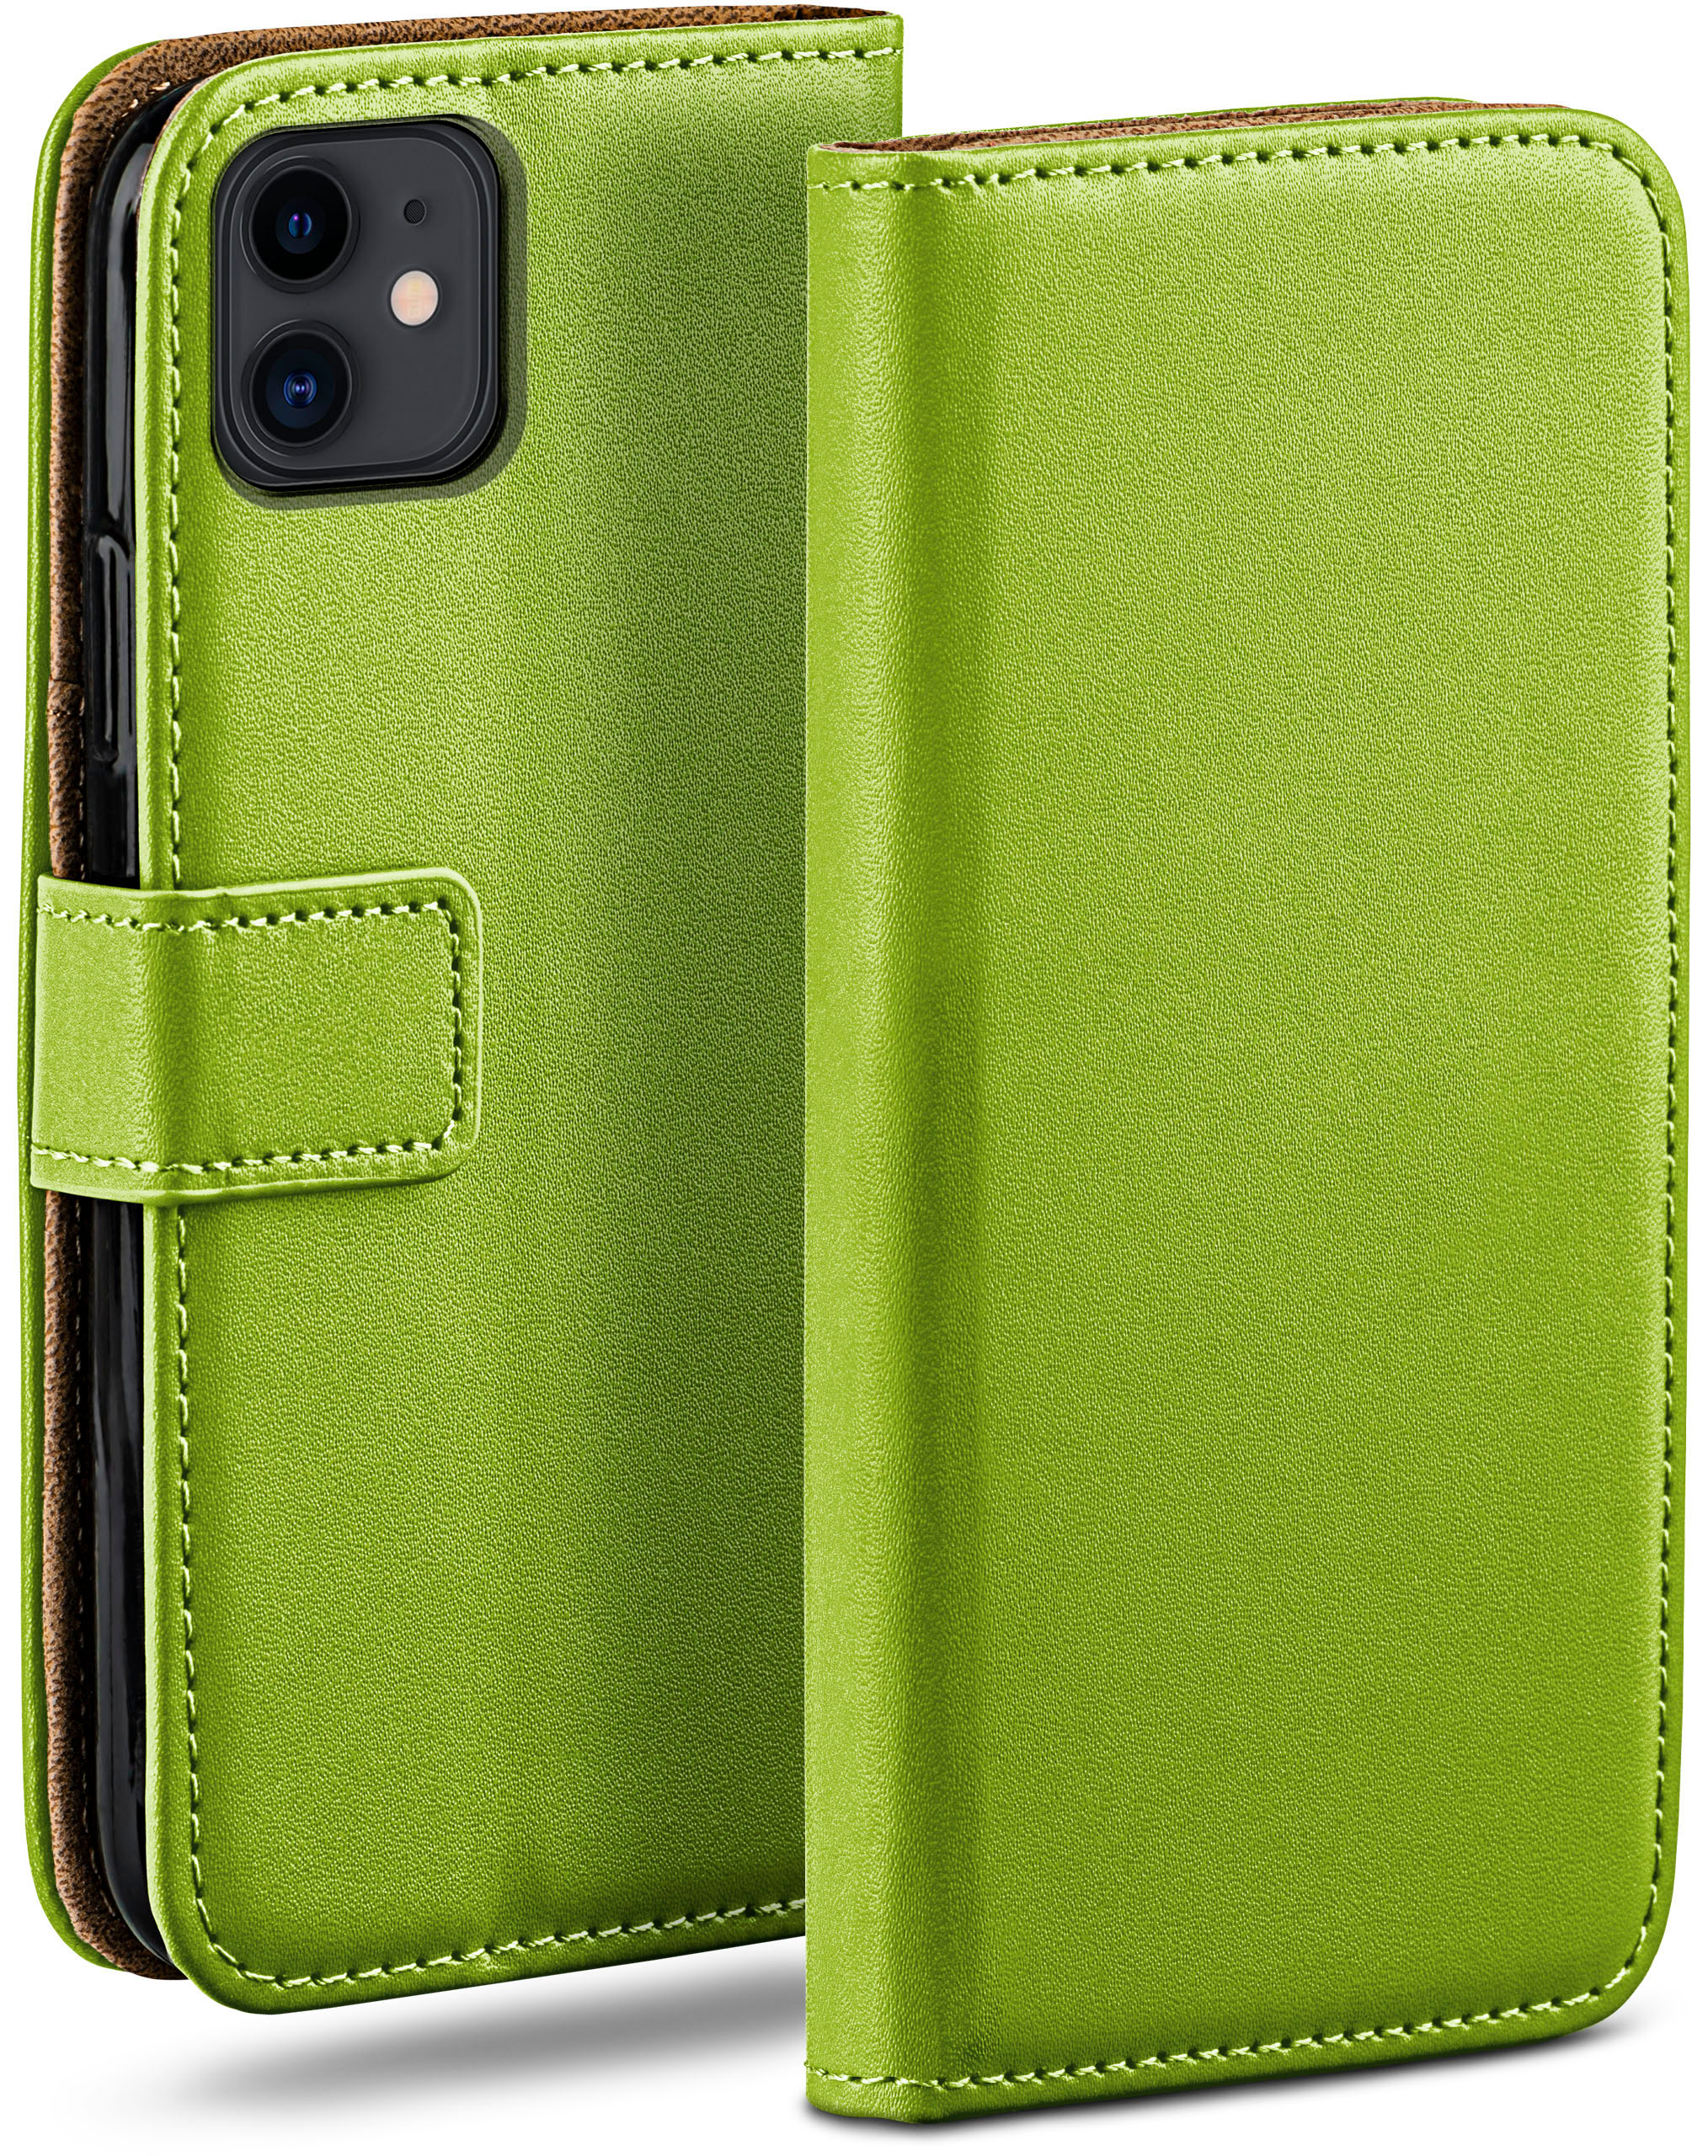 MOEX Book 11, Apple, Bookcover, Case, iPhone Lime-Green